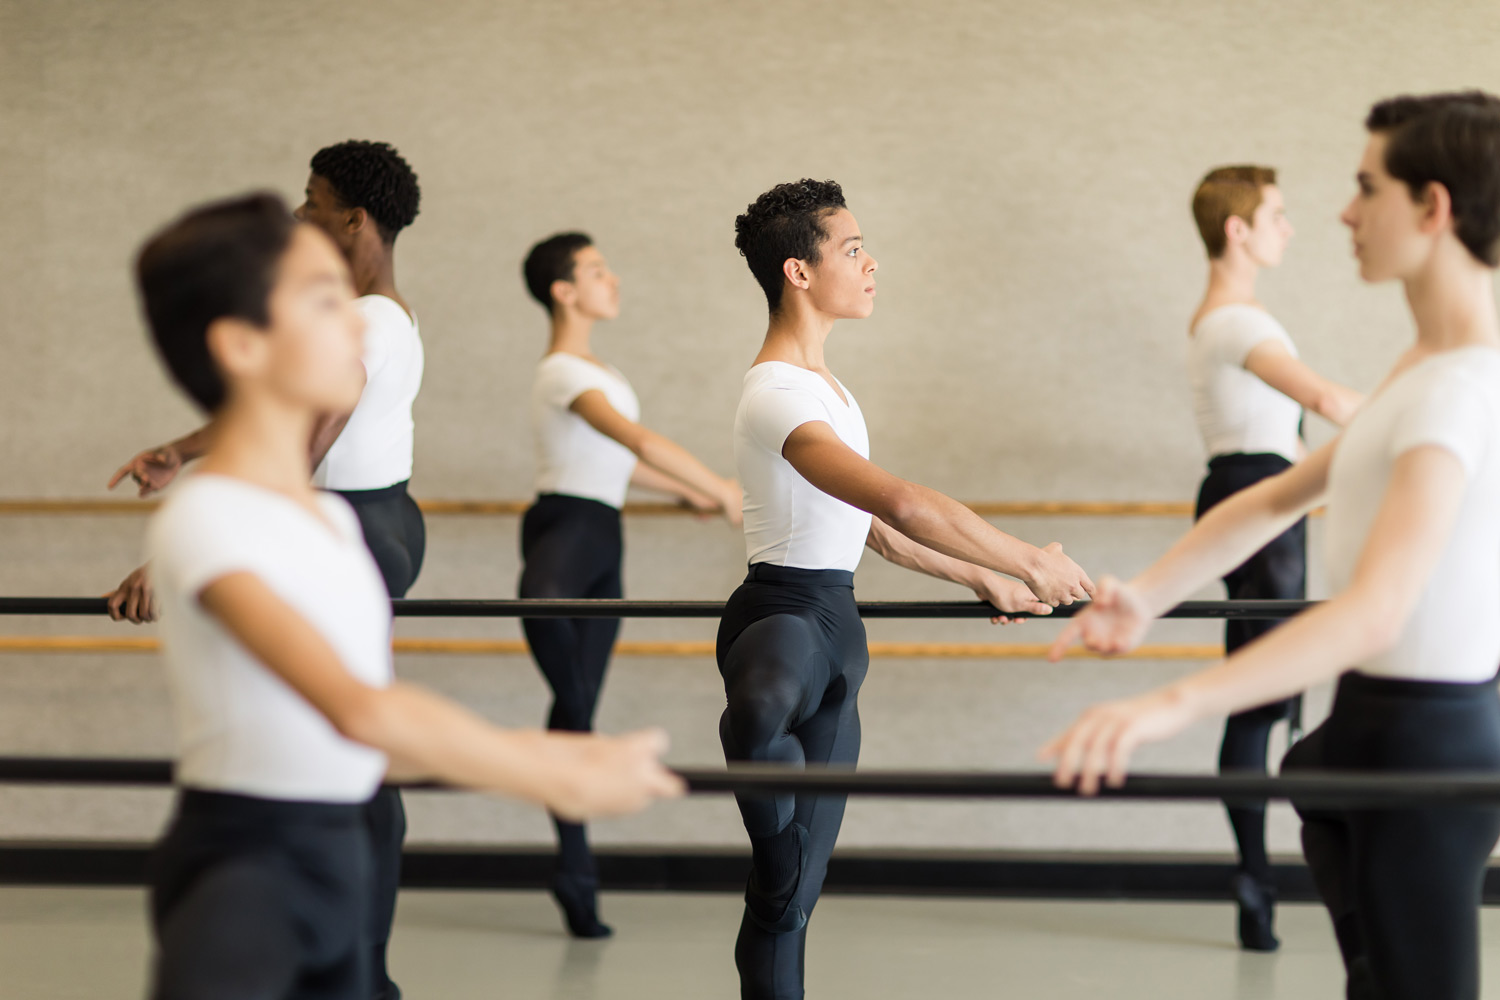 Ballet Fitness | Online Ballet Fitness and Barre Workouts